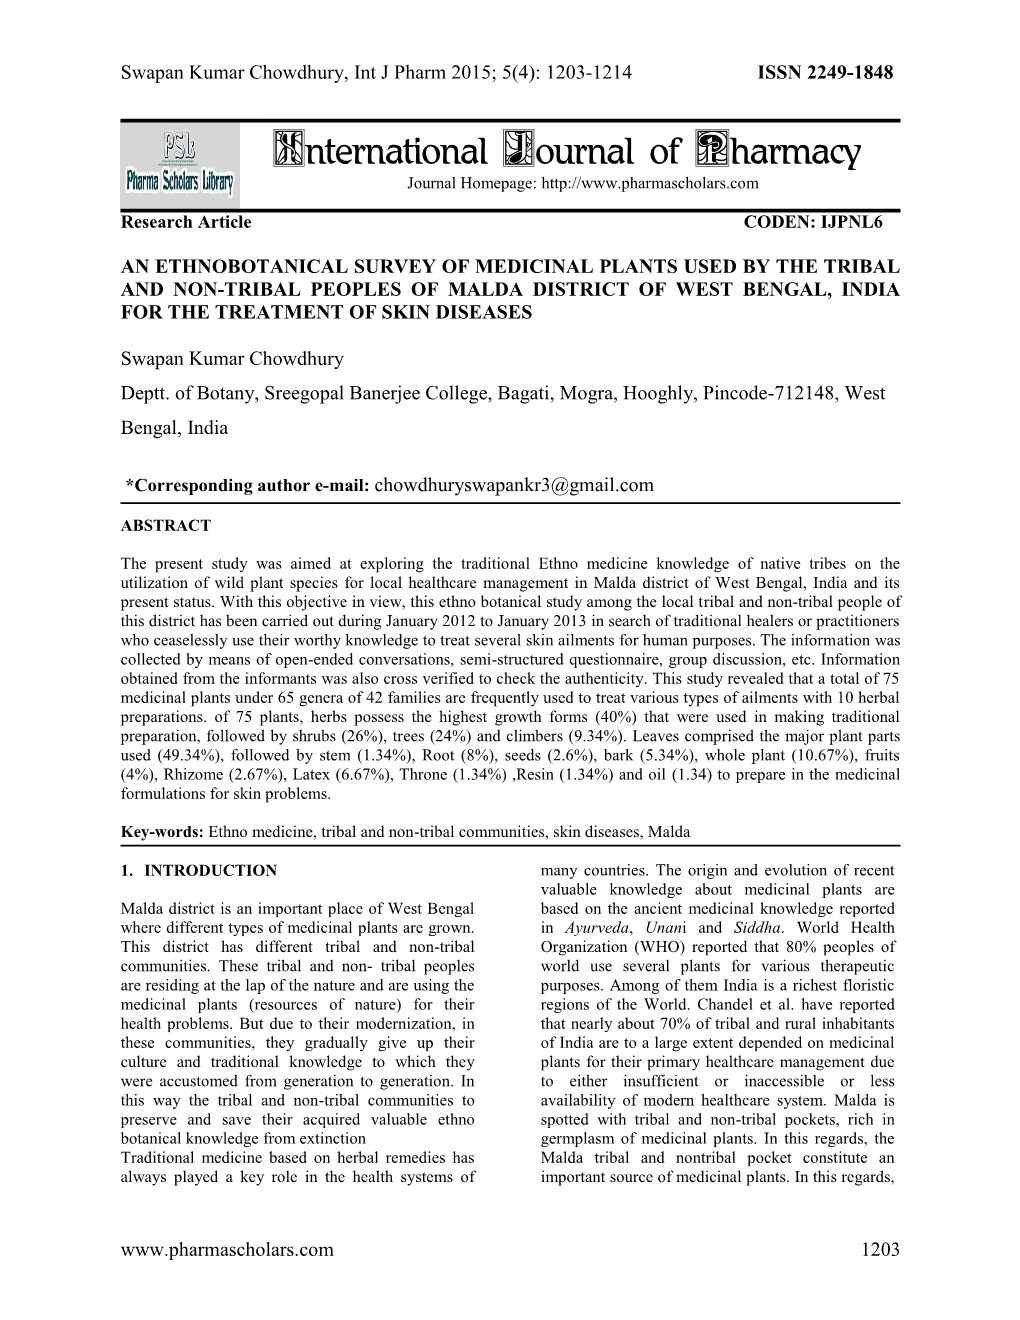 An Ethnobotanical Survey of Medicinal Plants Used by the Tribal and Non-Tribal Peoples of Malda District of West Bengal, India for the Treatment of Skin Diseases